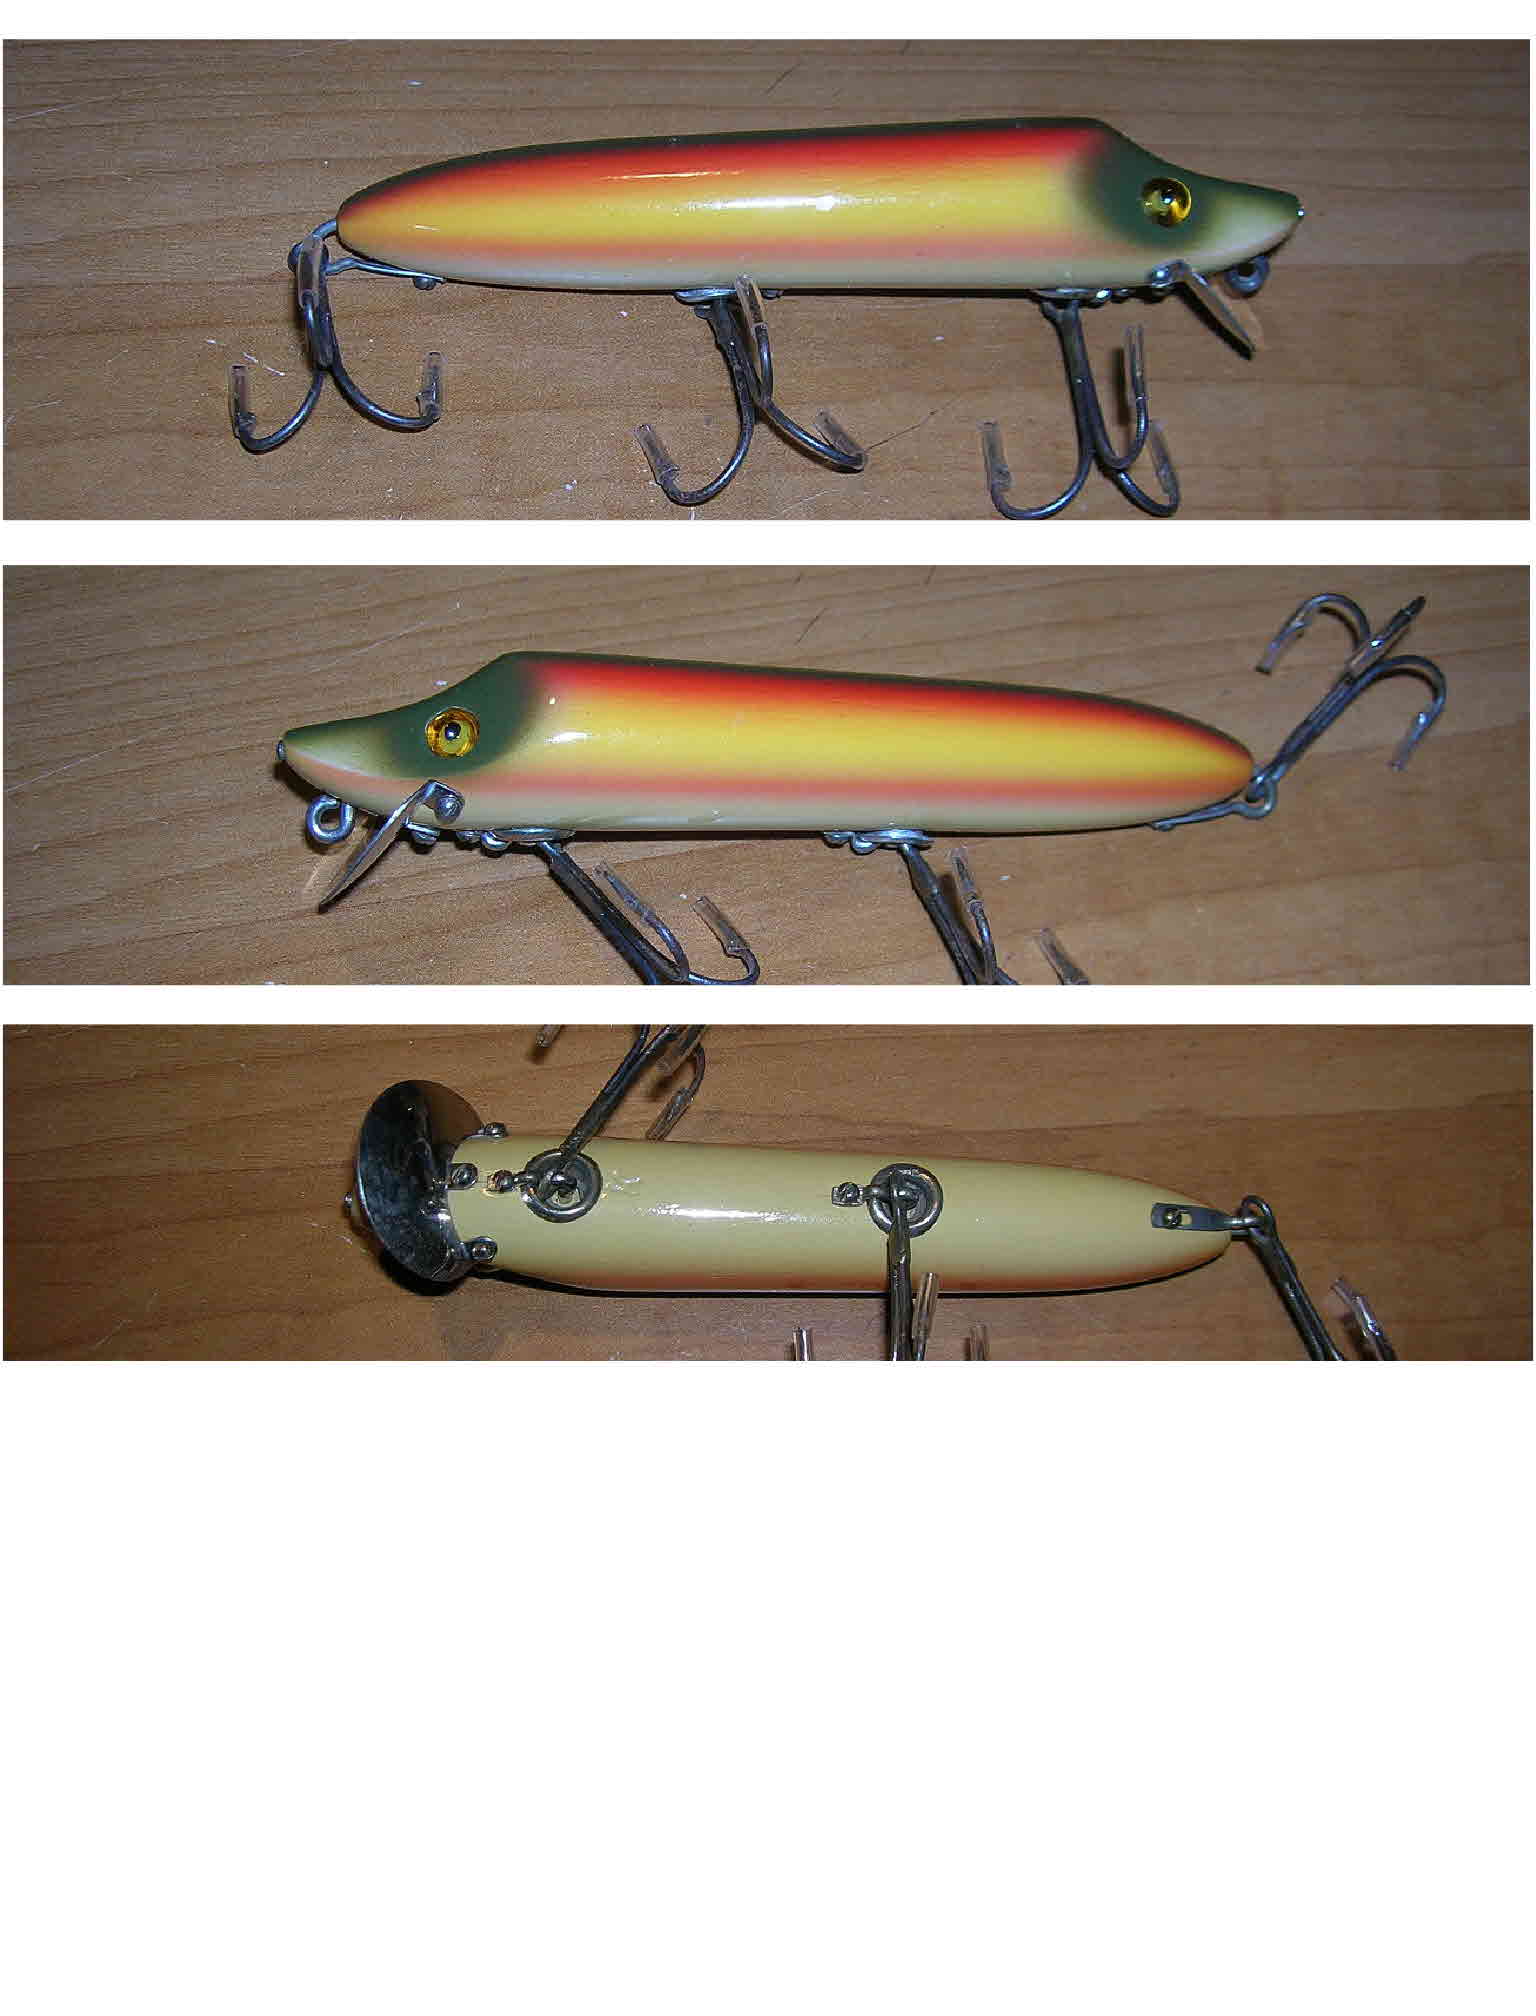 A 5" vintage Heddon Dowagiac Jointed Vamp wood lure #7300RH with the  original box from the 1960s. - Antique Mystique